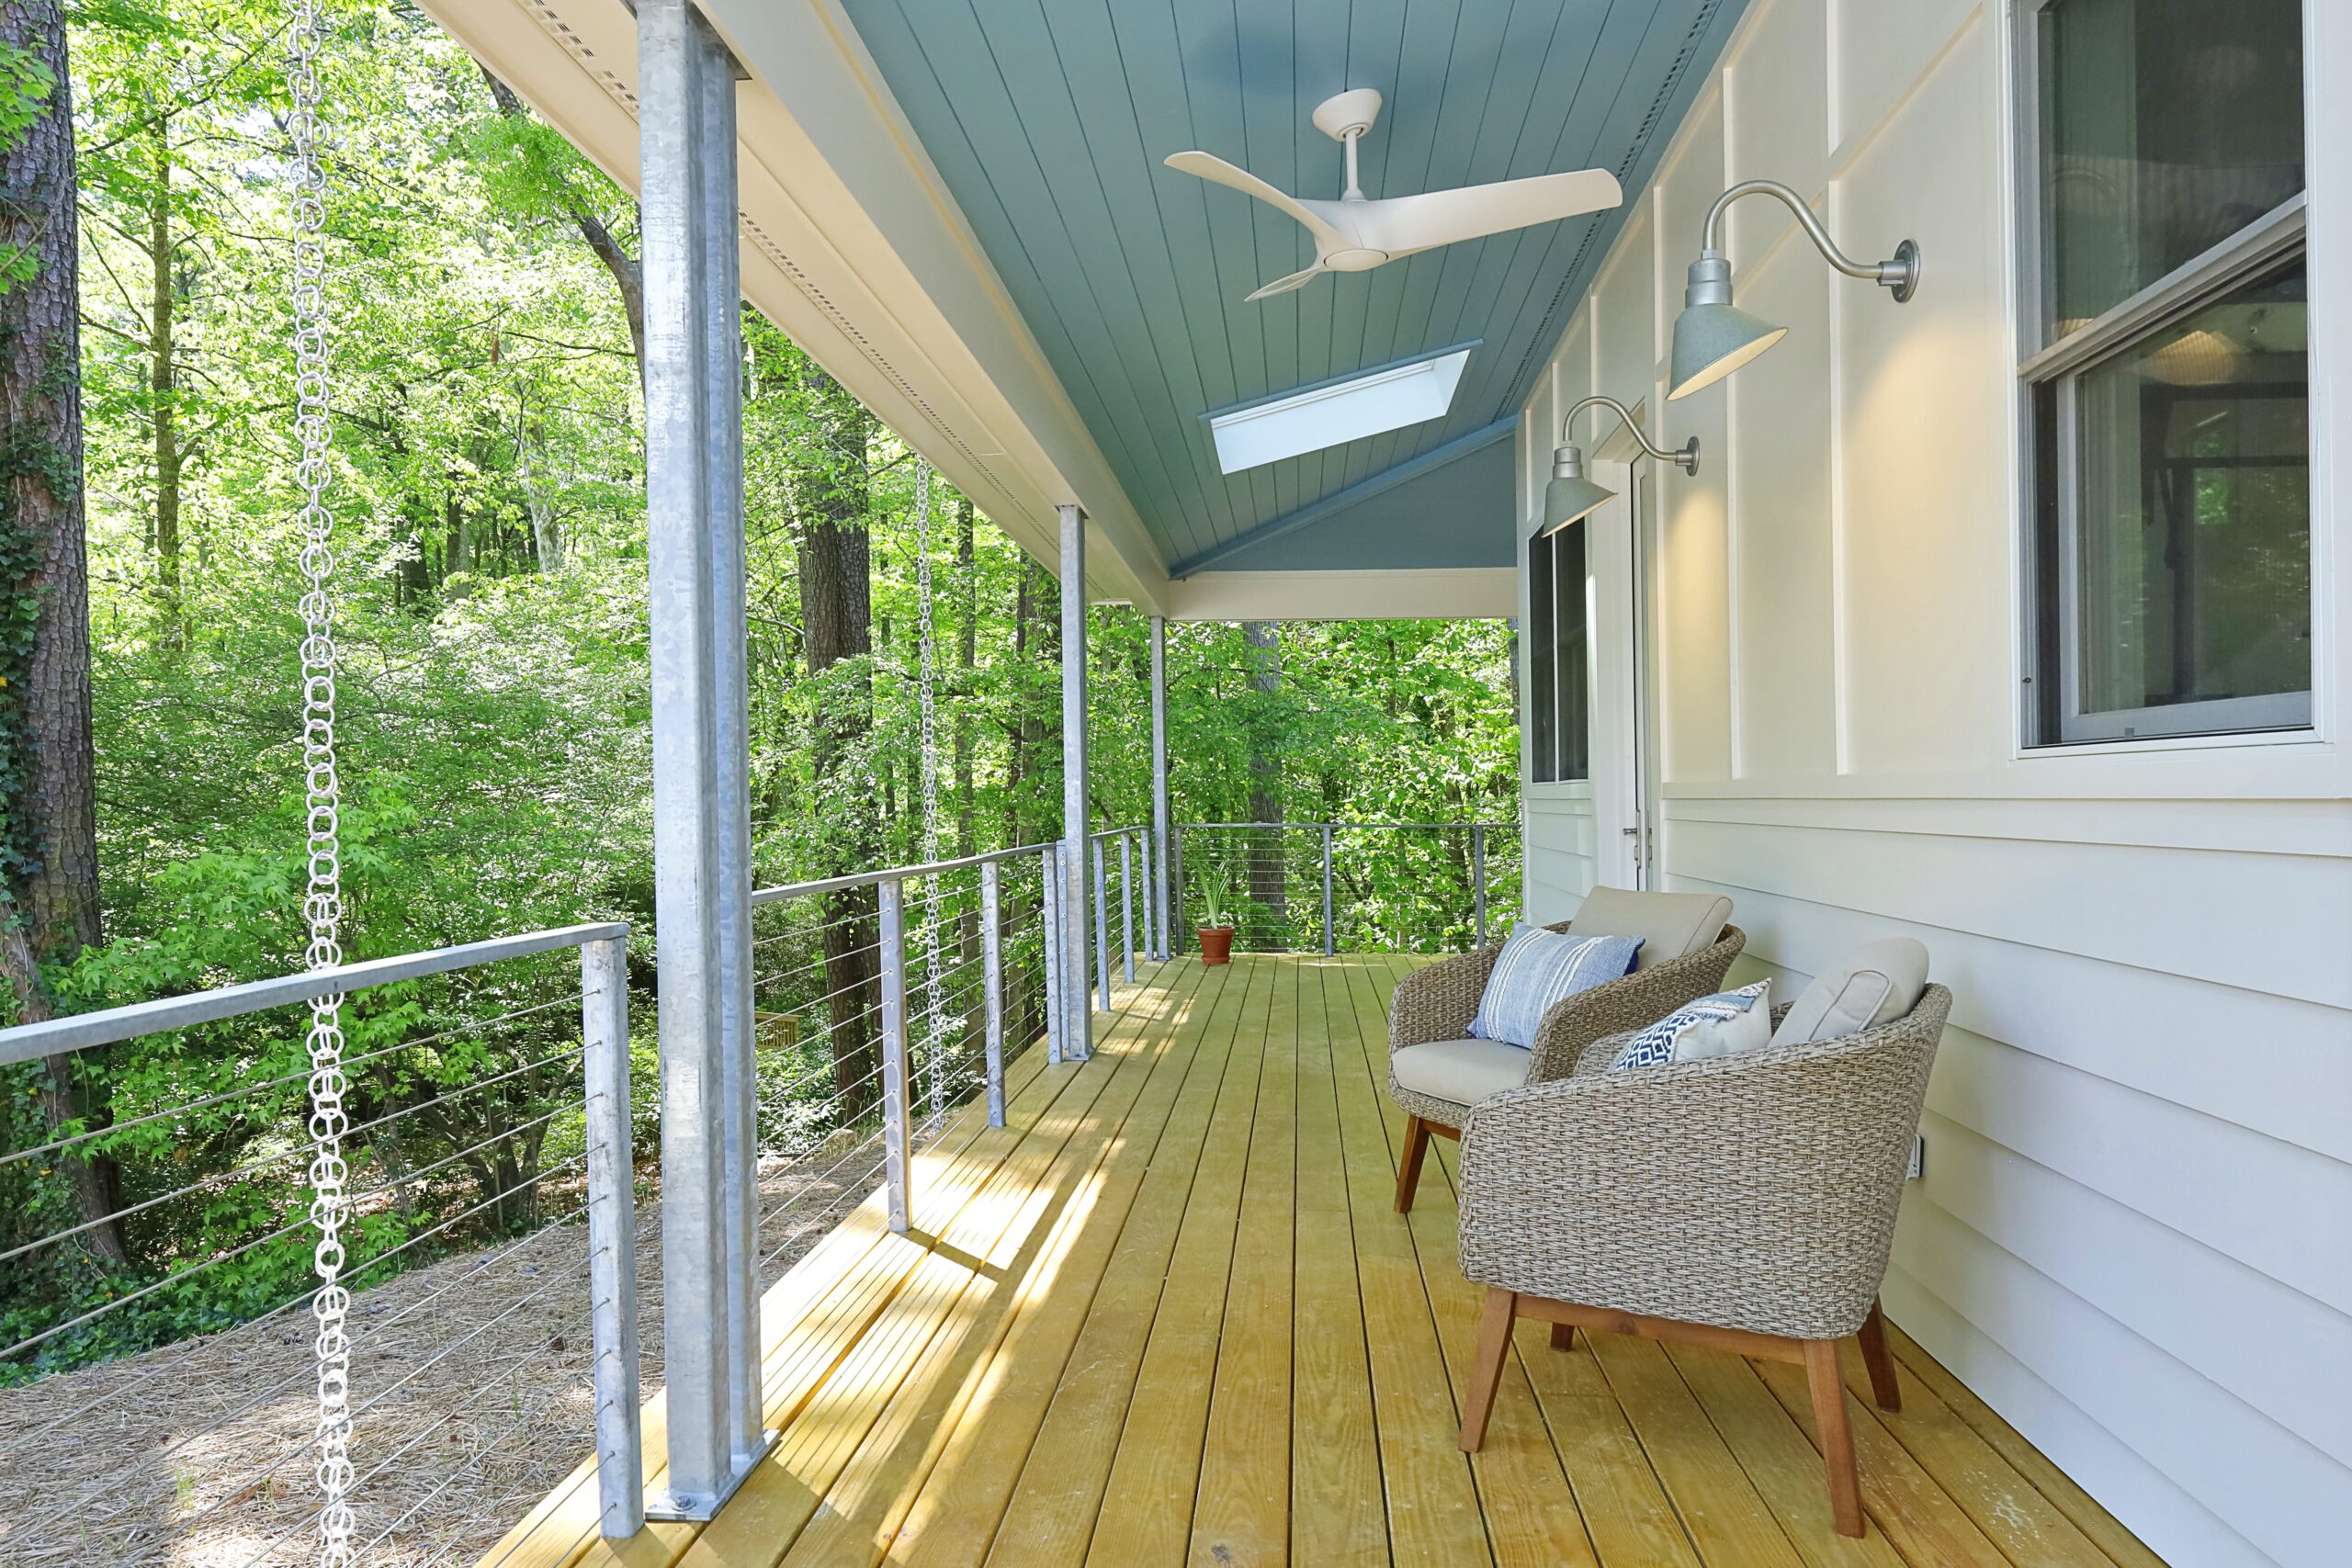 An exterior view of a covered porch with skylights, painted blue ceiling, galvanized steel railings and columns, and board-and-batten white siding